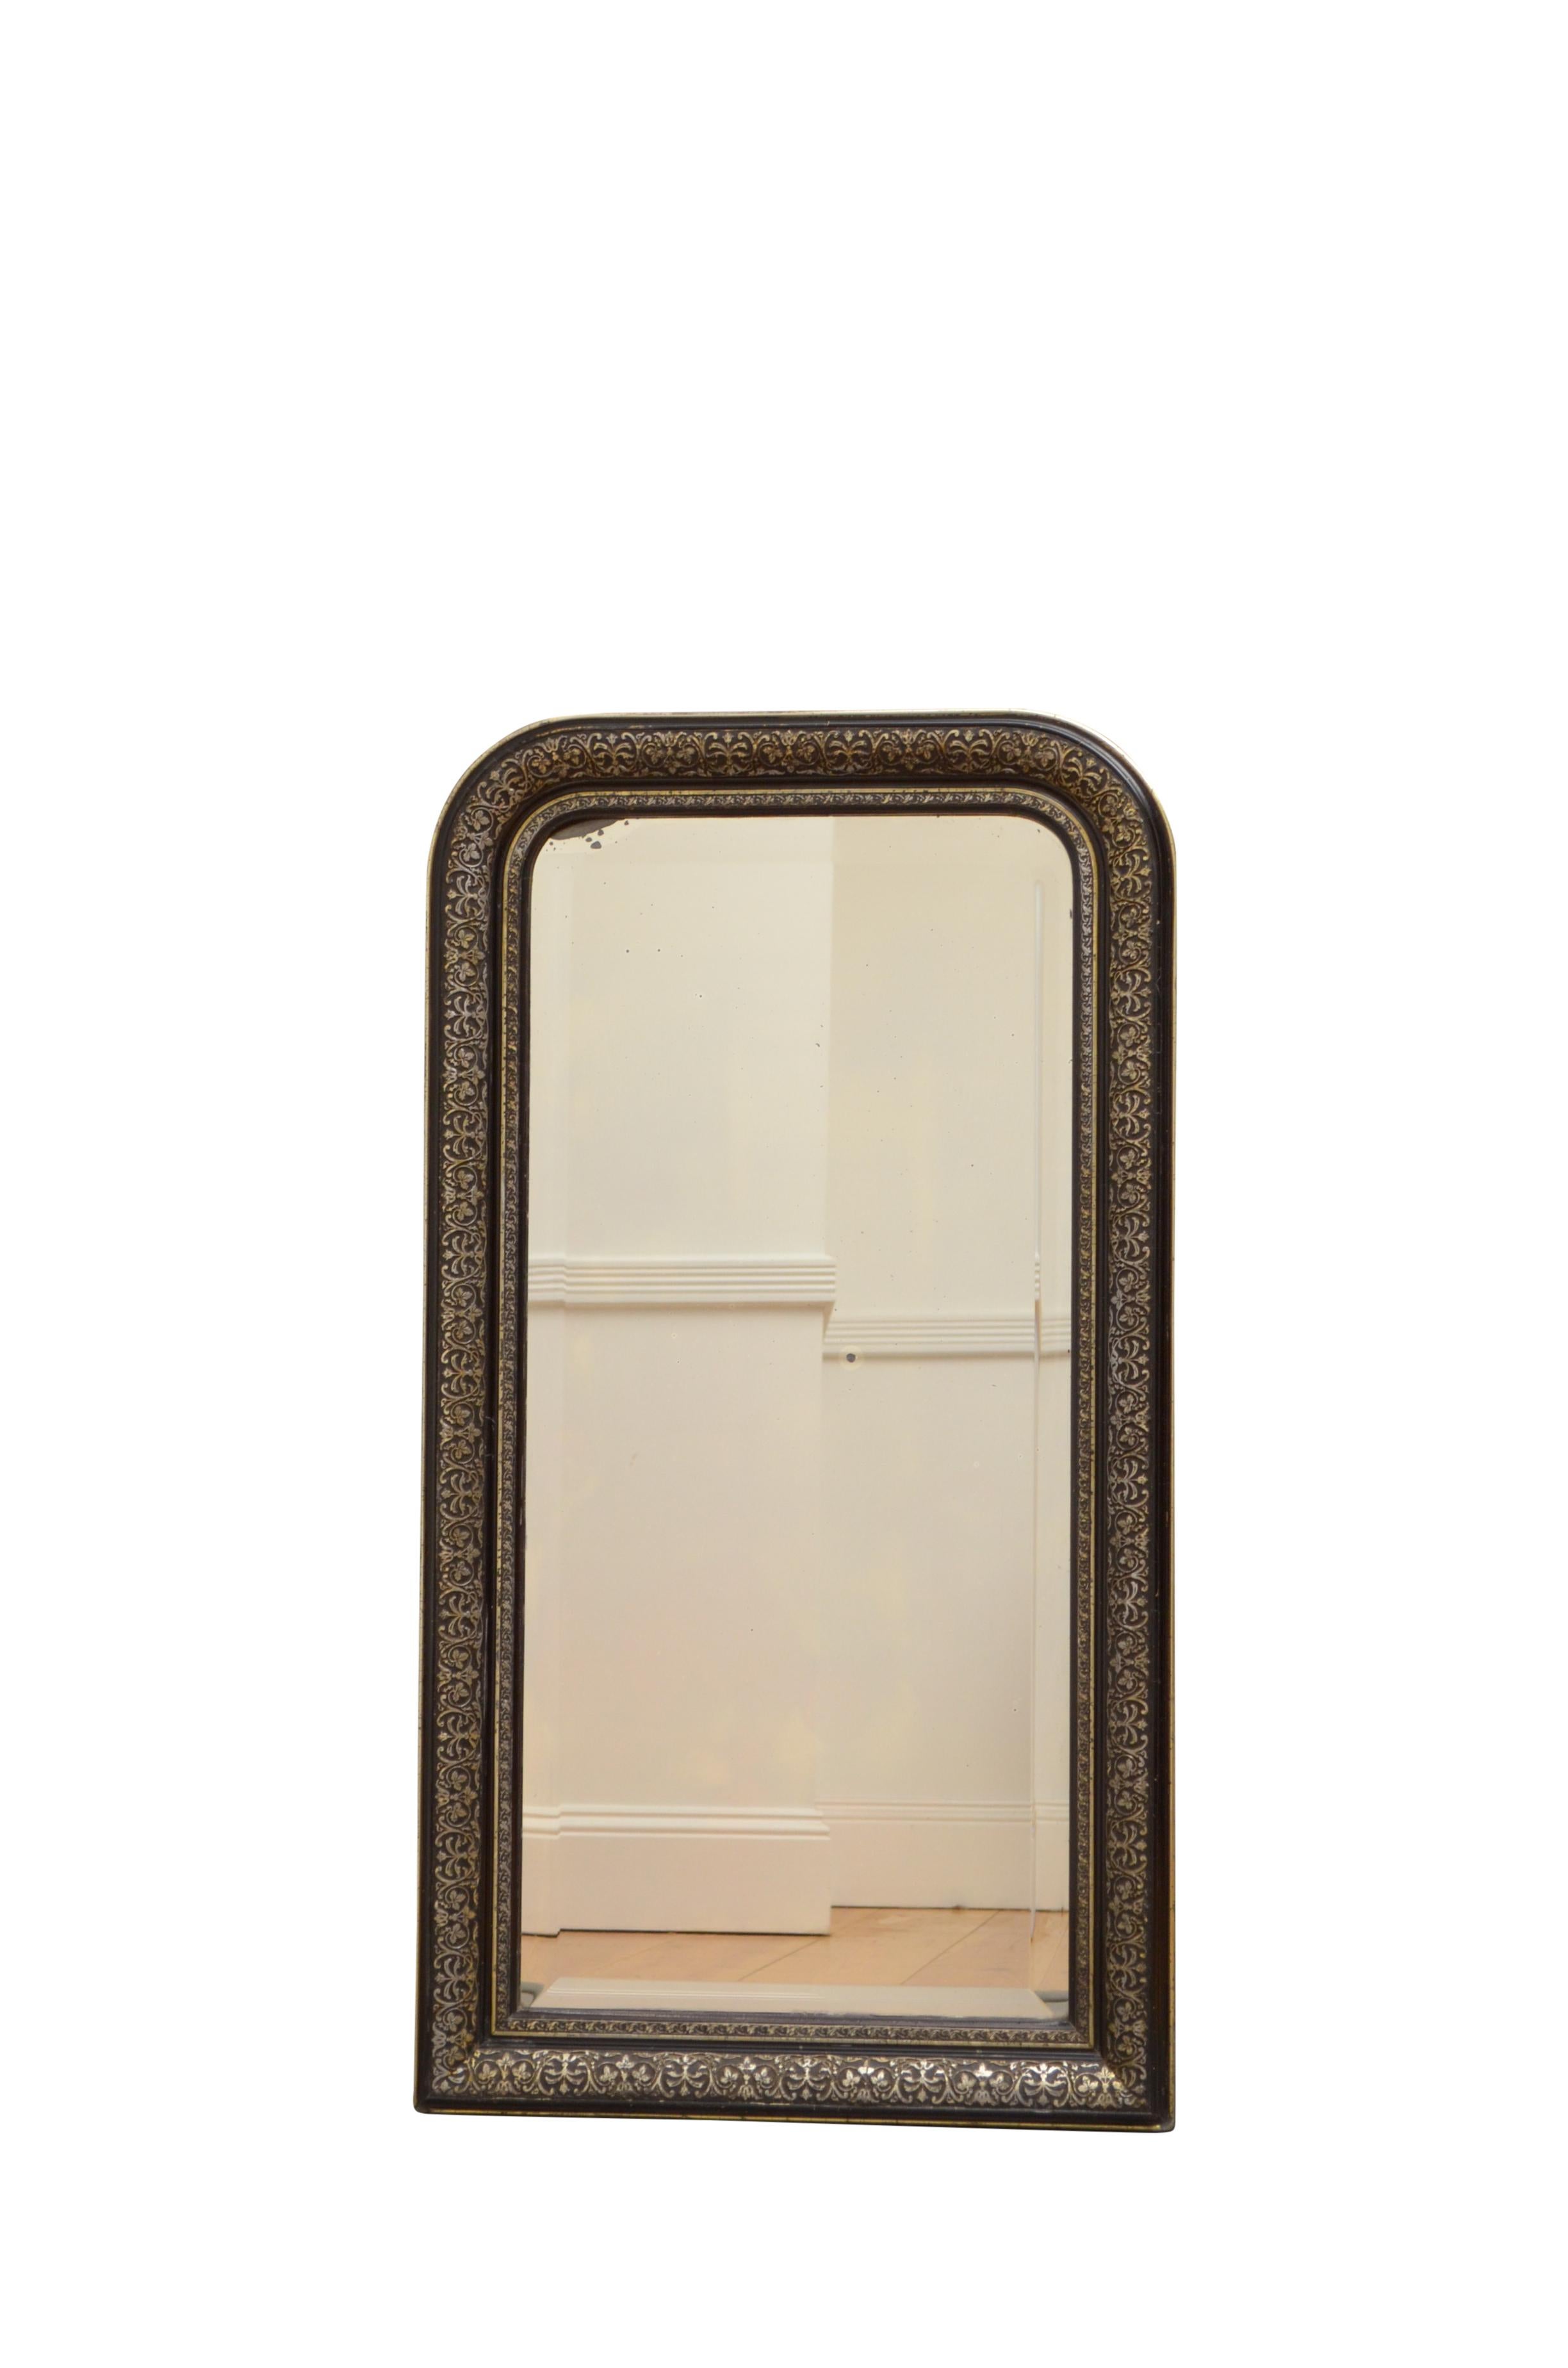 19th century wall mirror with original bevelled edge glass with some foxing in ebonised and gilded frame. This antique mirror retains its original glass and it is in wonderful condition, ready to place at home. c1880
Measures: H 41.5